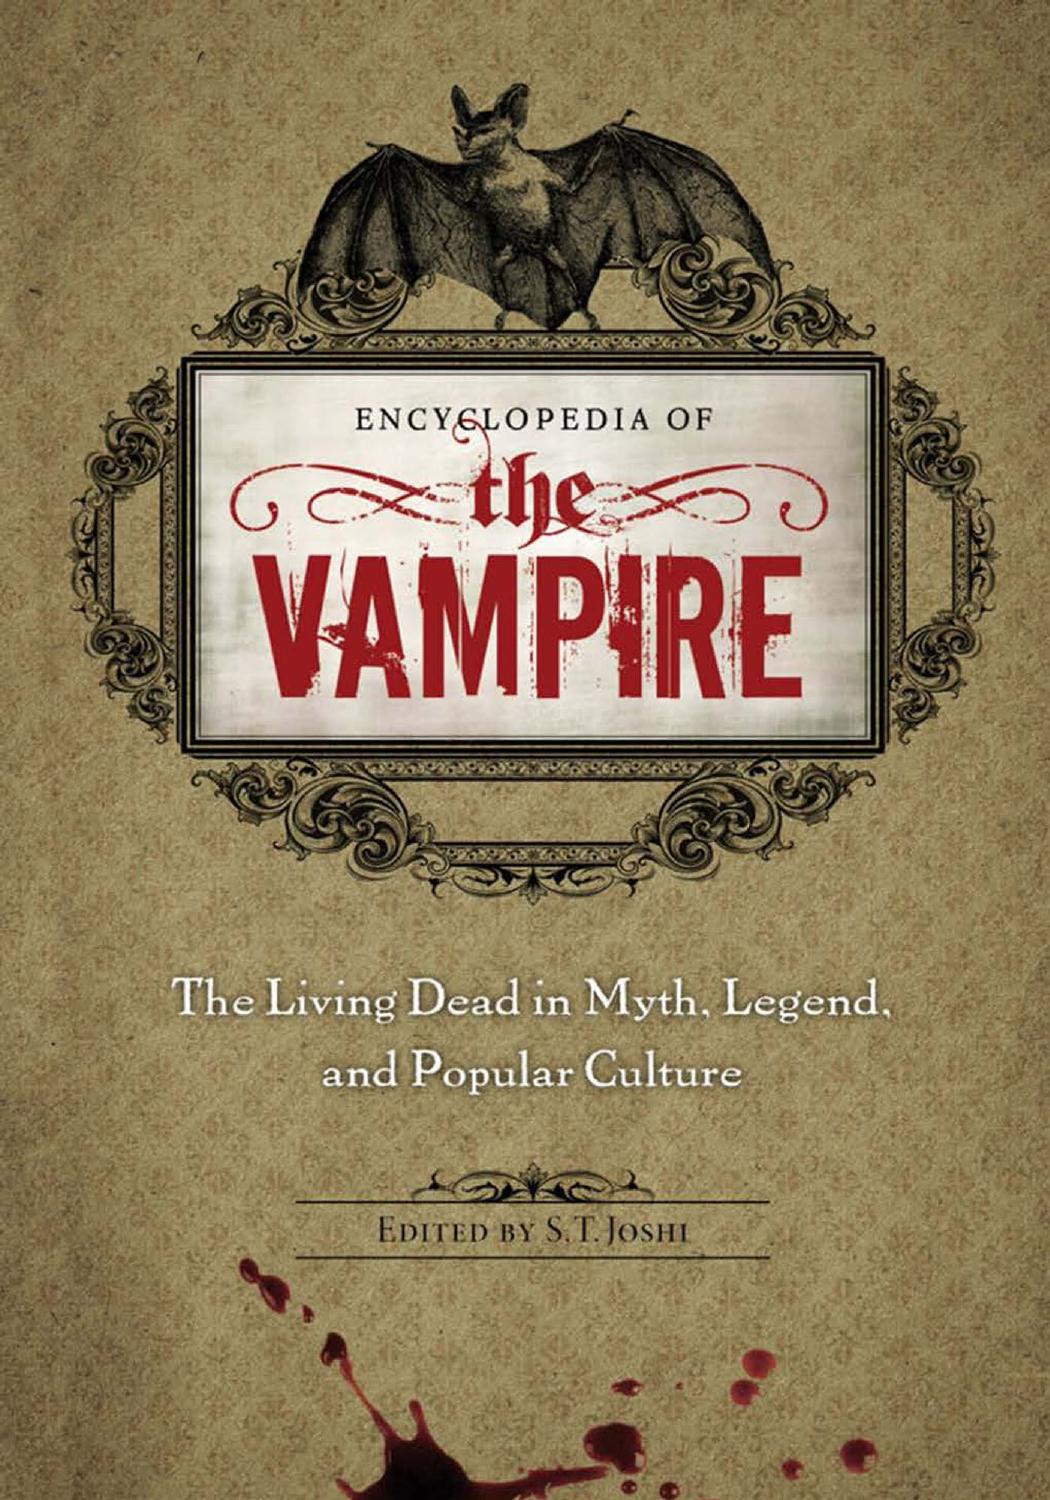 Encyclopedia of the Vampire: The Living Dead in Myth, Legend, and Popular Culture: The Living Dead in Myth, Legend, and Popular Culture